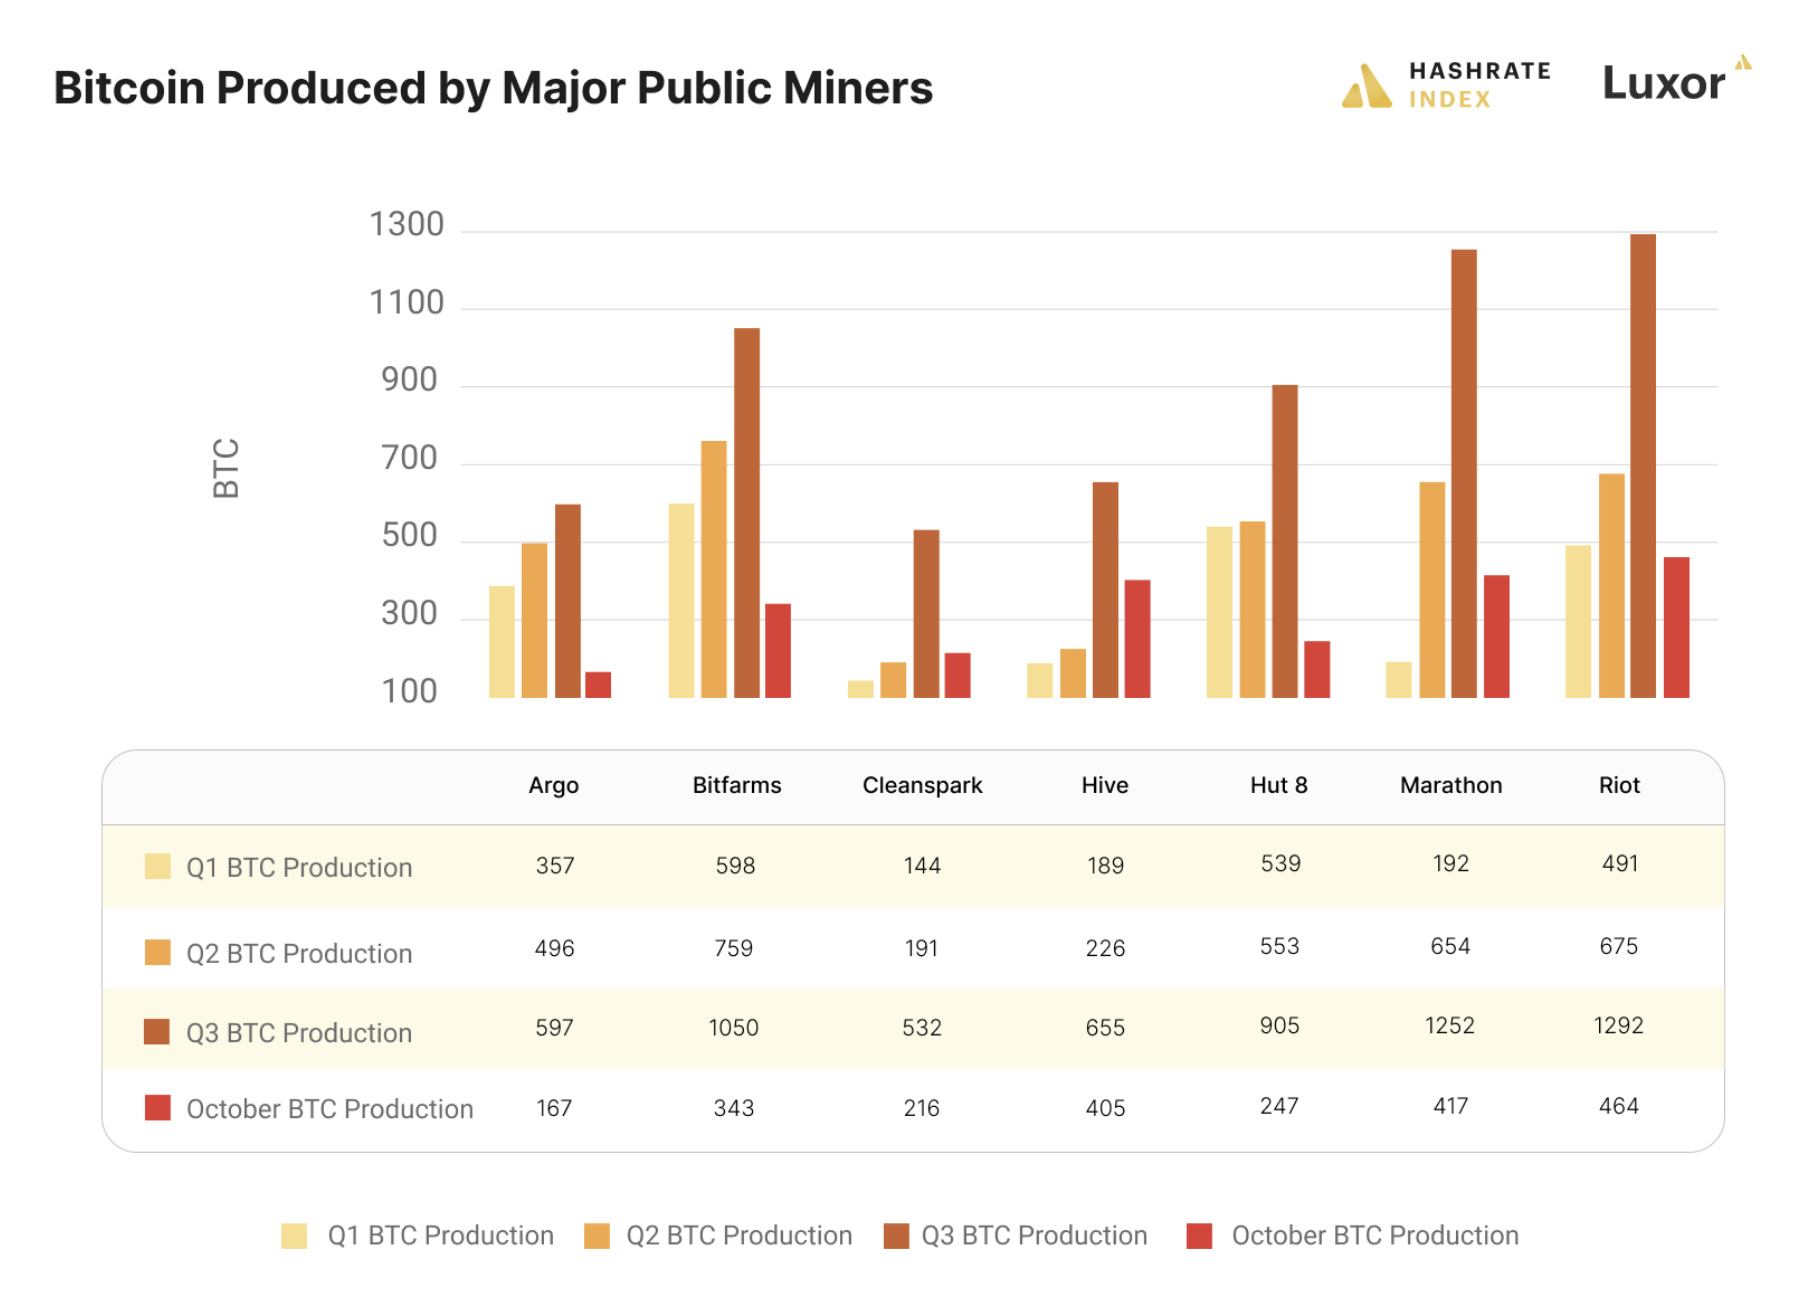 Bitcoin mining production by public miners. Source: company press releases, public filings